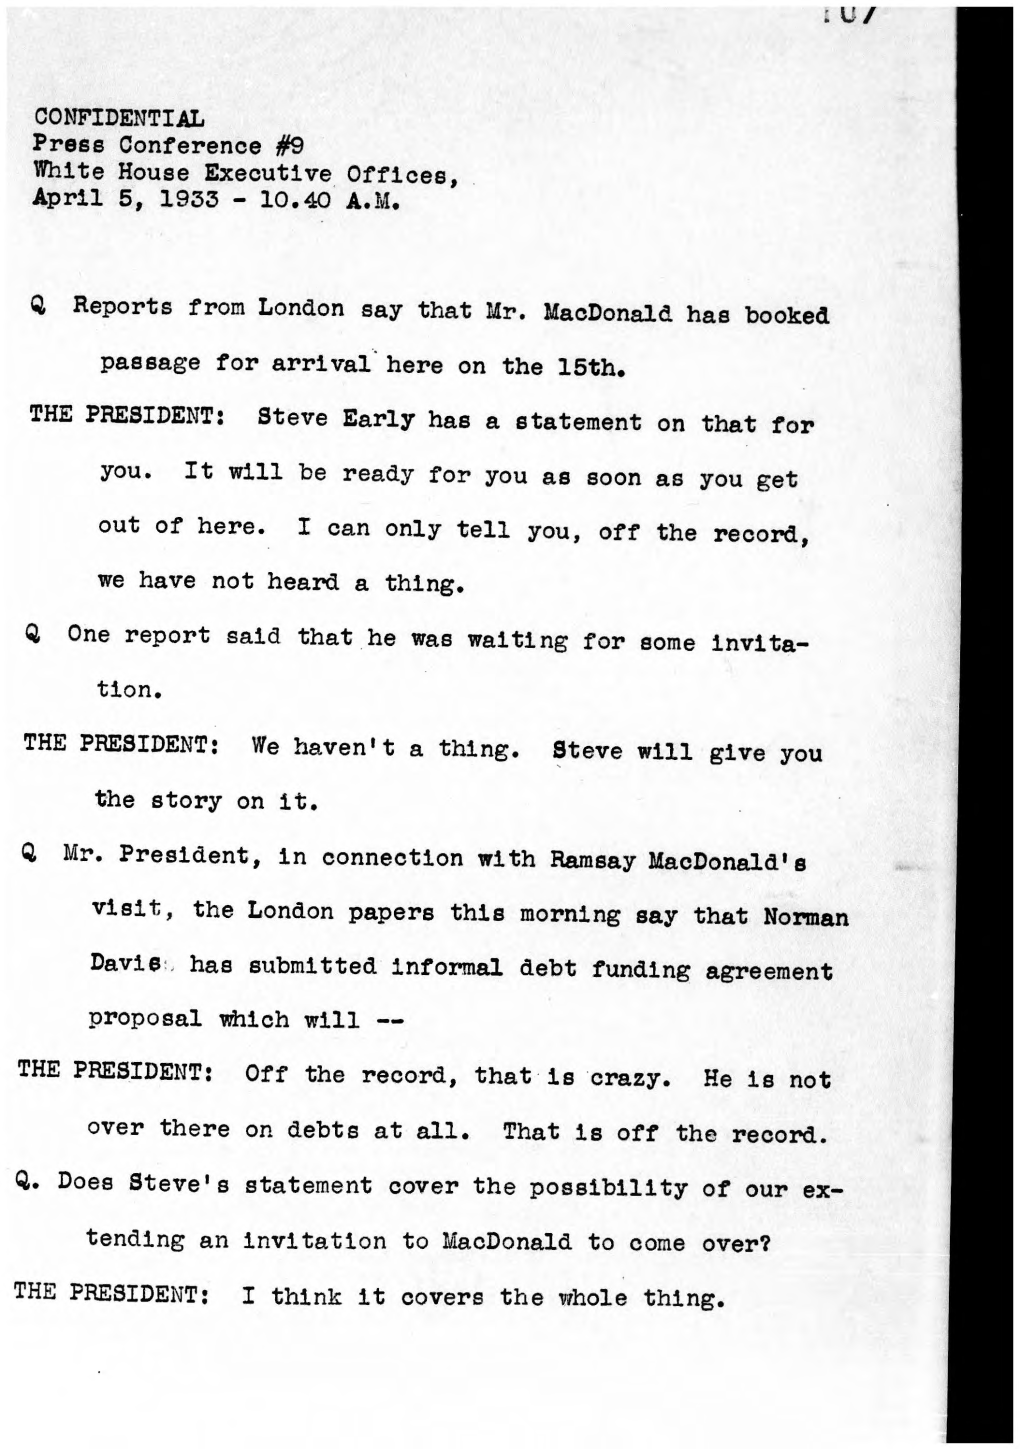 CONFIDENTIAL Press Conference #9 White House Executive Offices, April 5, 1933 - 10.40 A.M